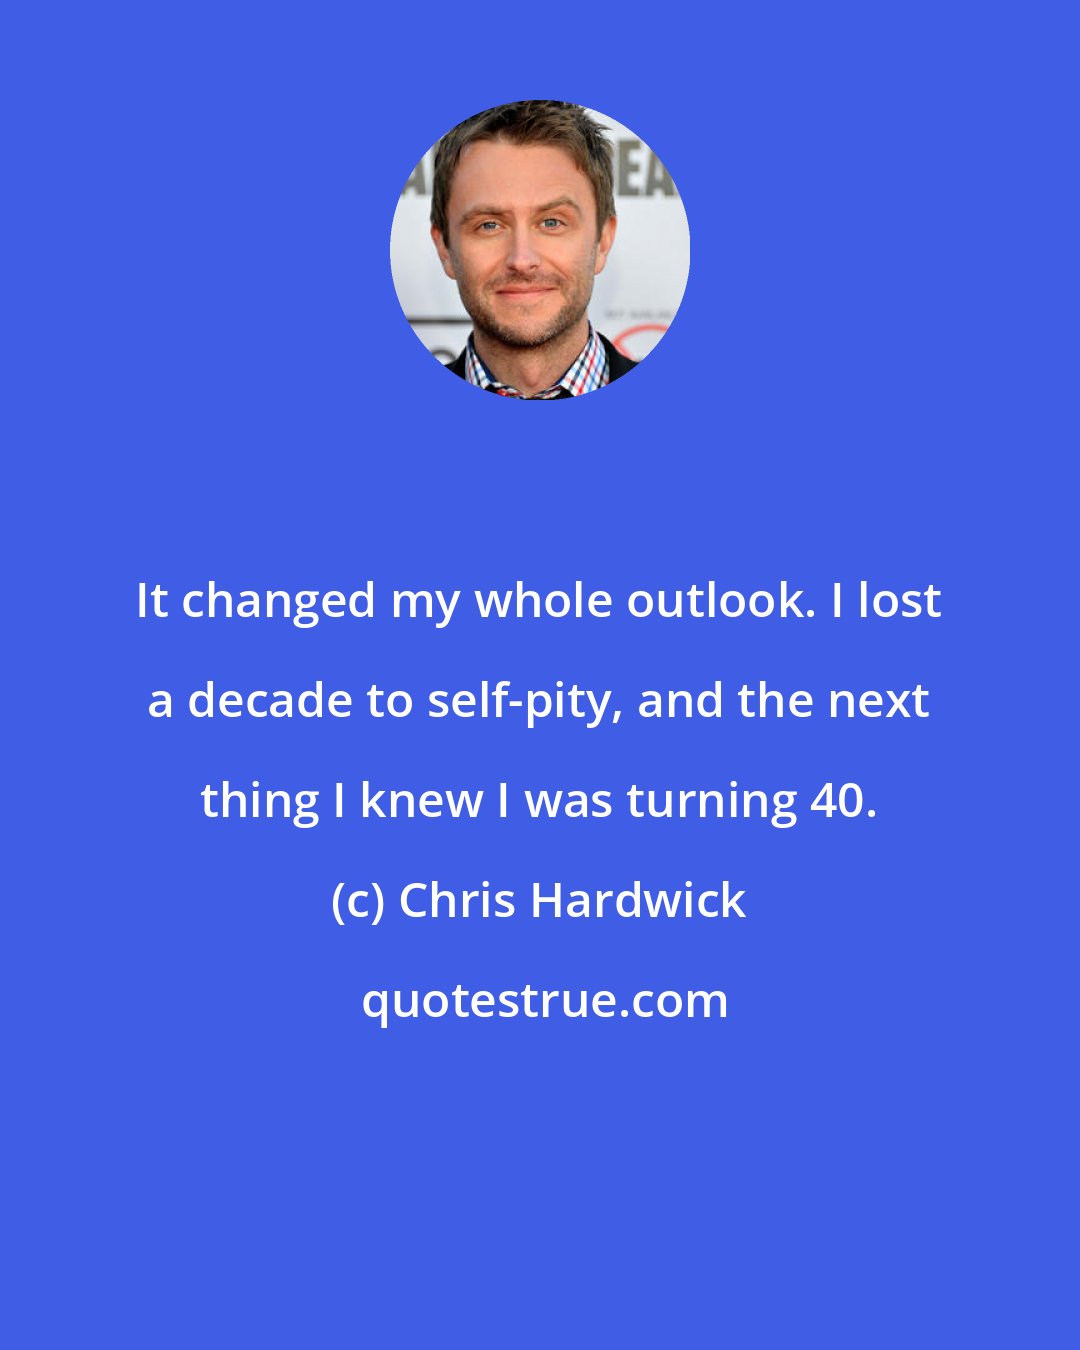 Chris Hardwick: It changed my whole outlook. I lost a decade to self-pity, and the next thing I knew I was turning 40.